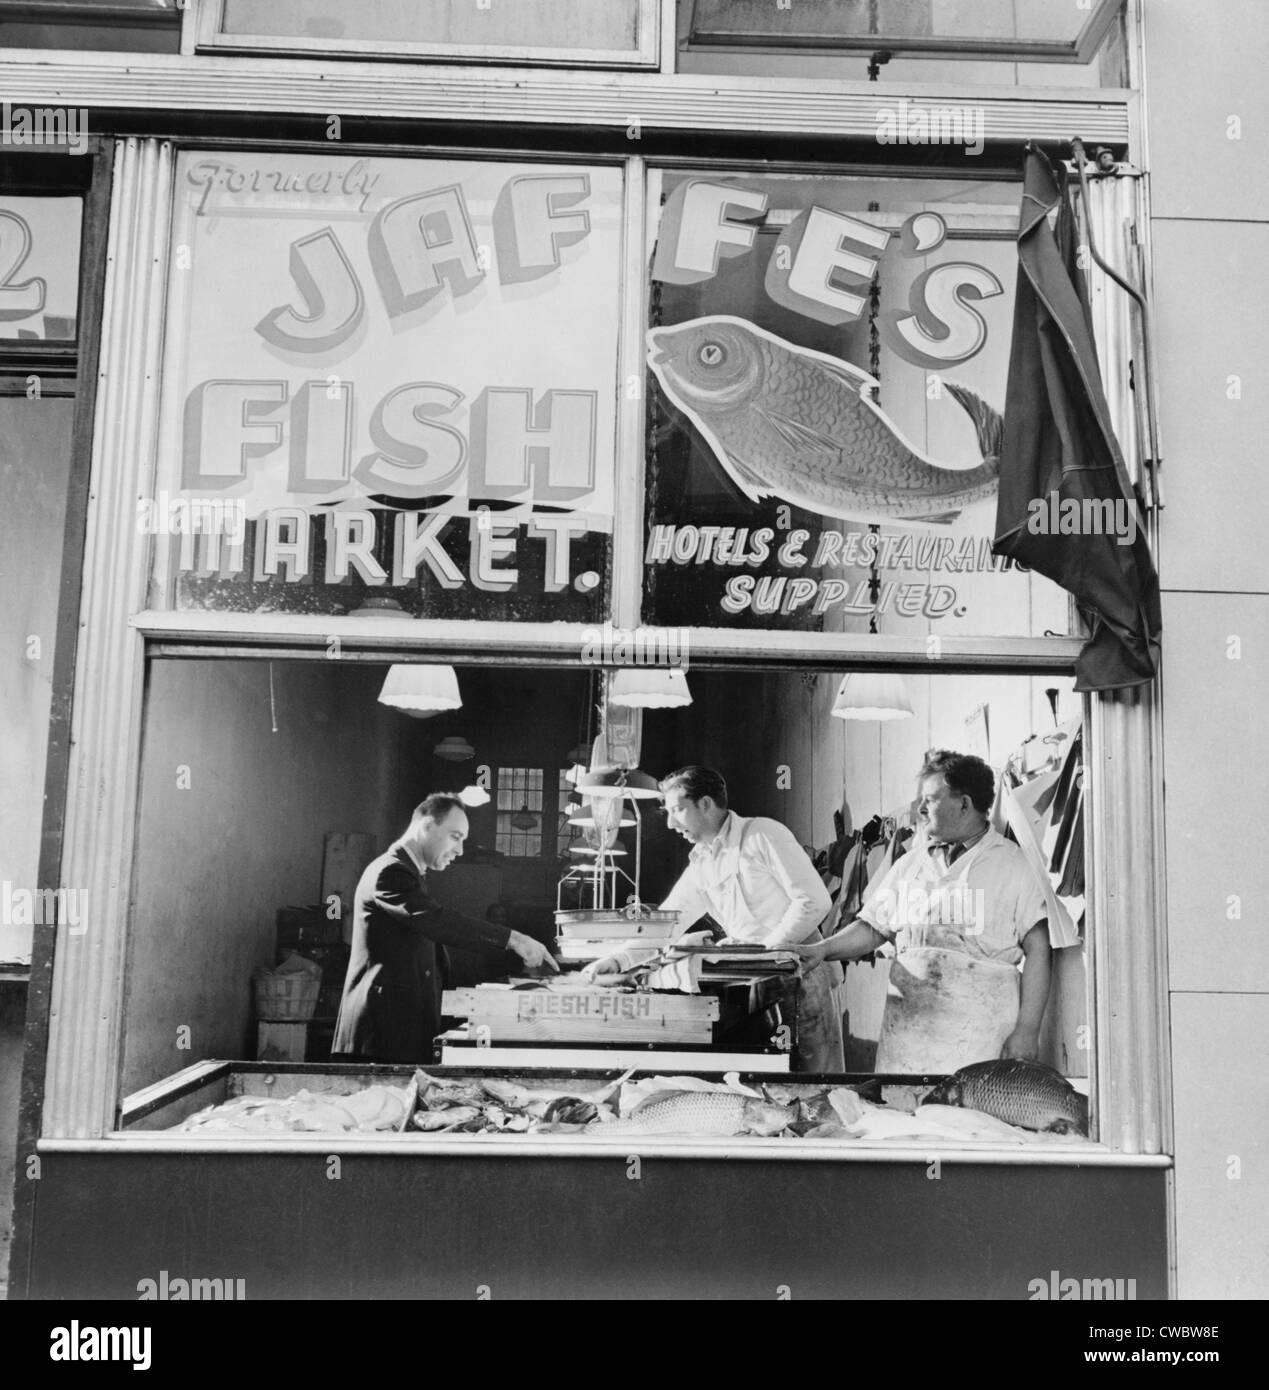 Fish store in the Lower East Side, the Jewish neighborhood of New York City. August 1942. Stock Photo